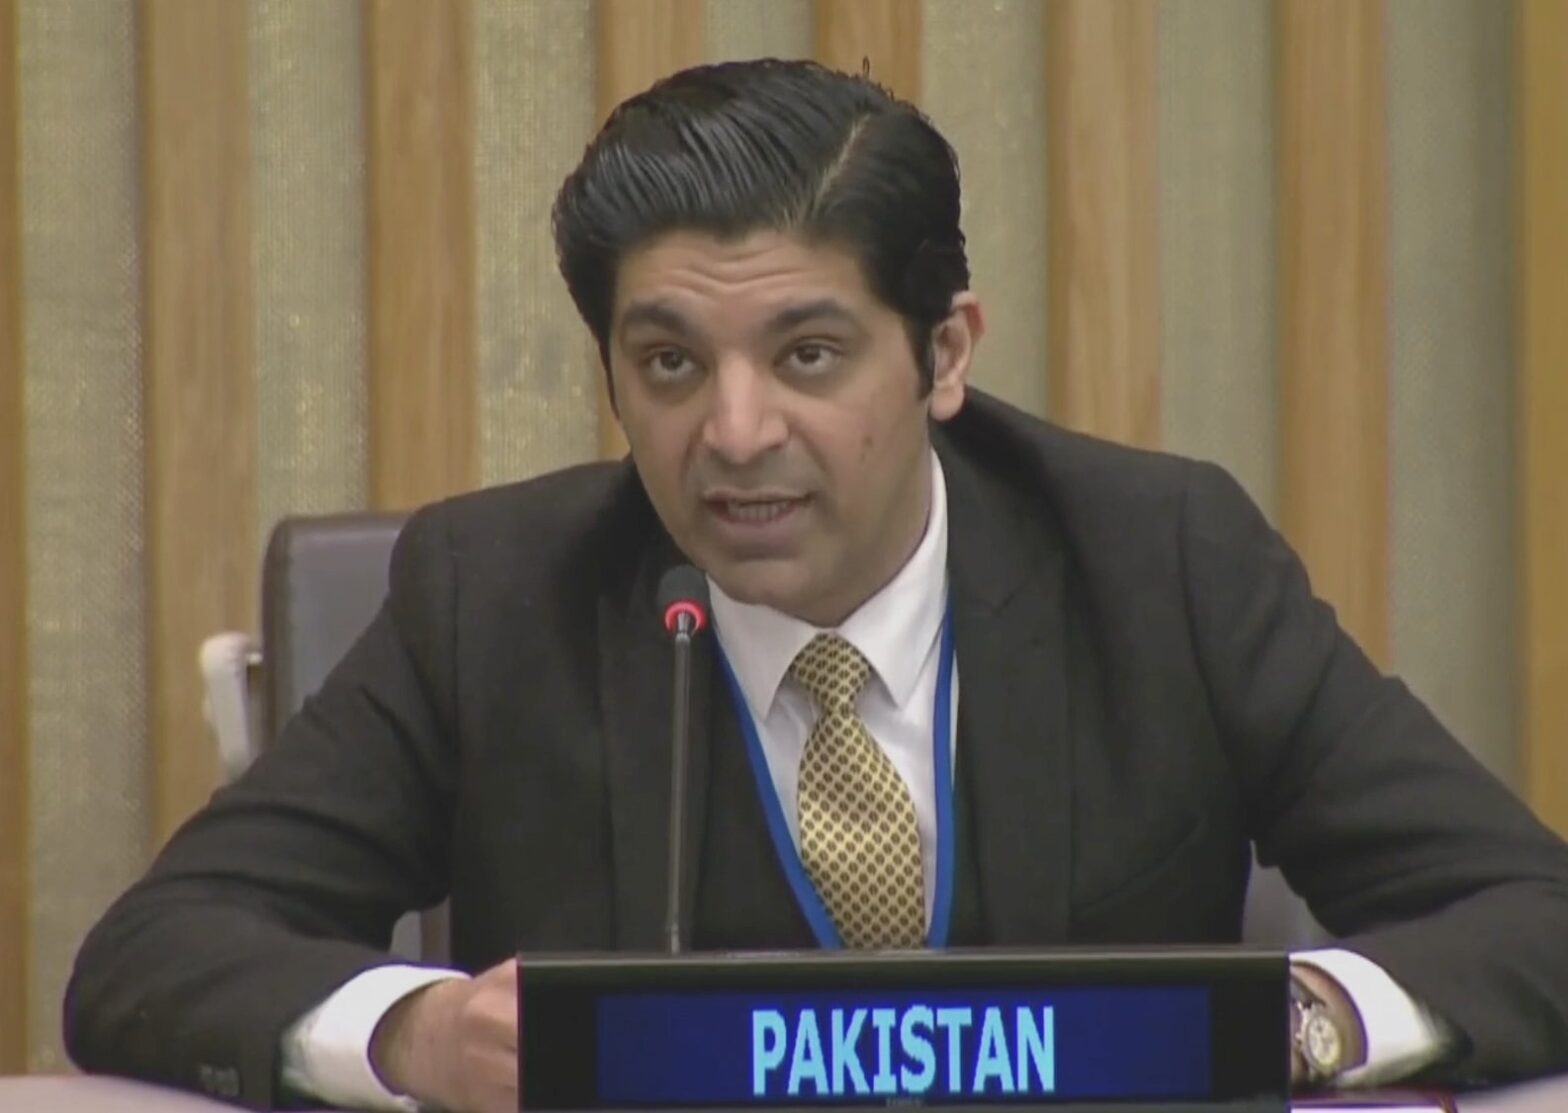 Pakistan urges resolution of prolonged conflicts & occupation to fight extremism